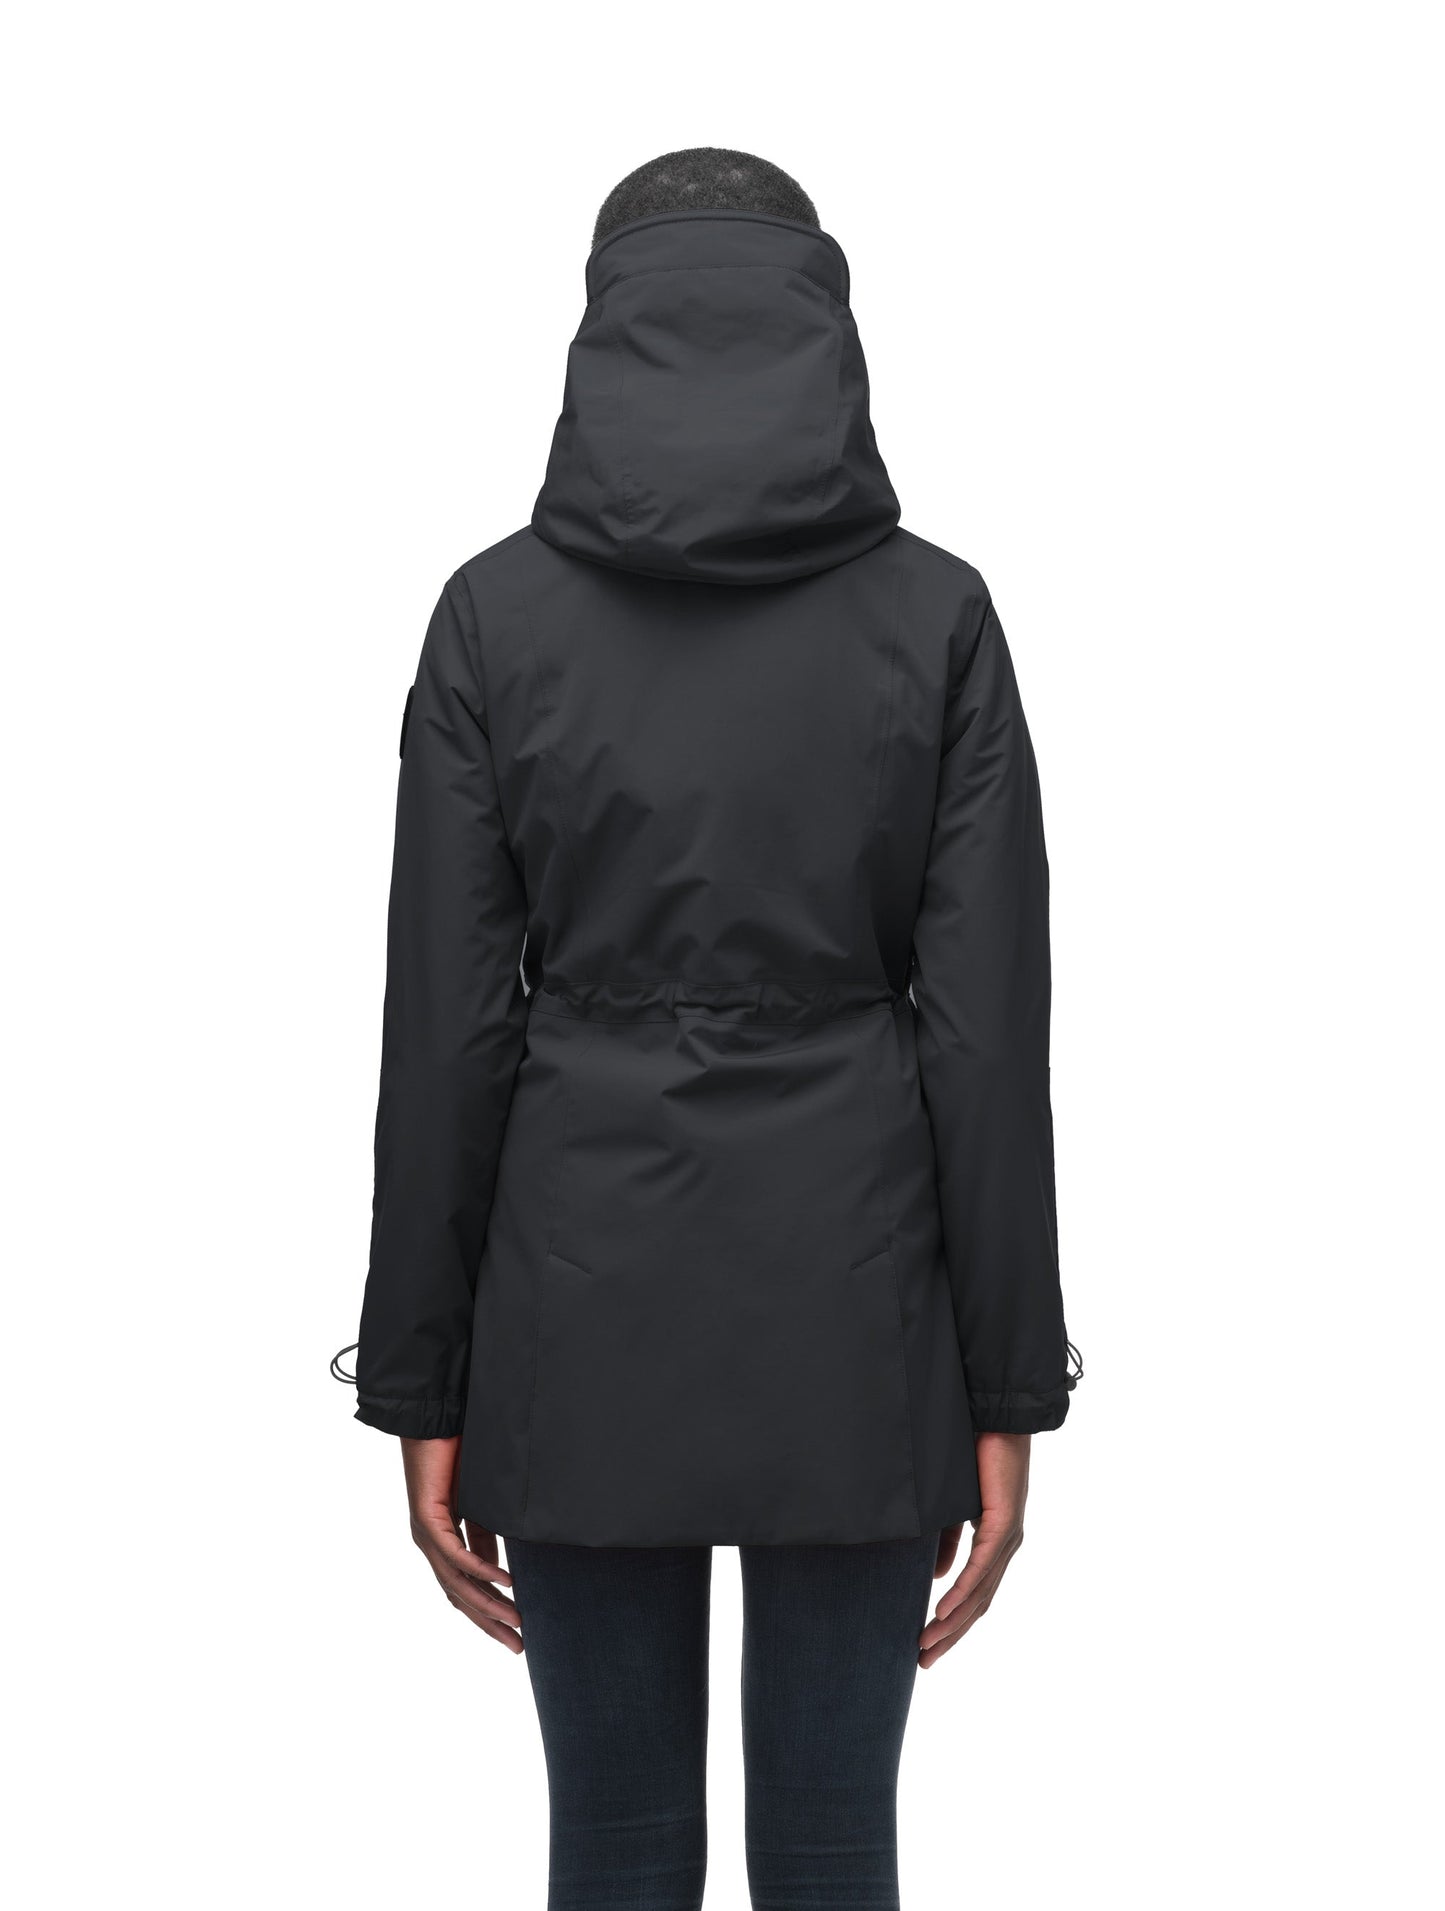 Women's thigh length raincoat with collar and non-removable hood in Black